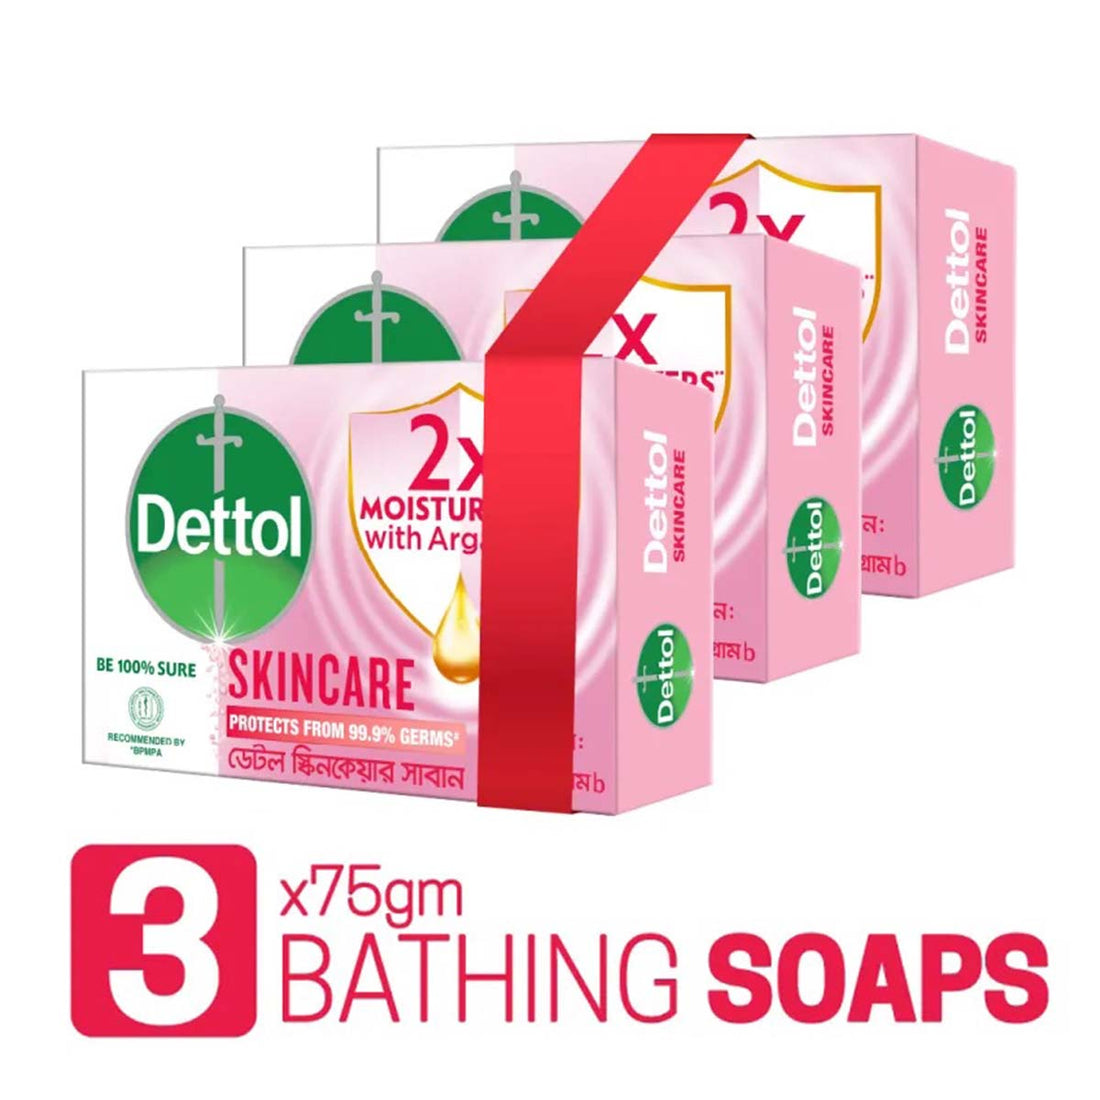 Dettol Soap Skincare Pack of 3 (75gm X 3), 2X Moisturizers with Argan Oil Bathing Bar